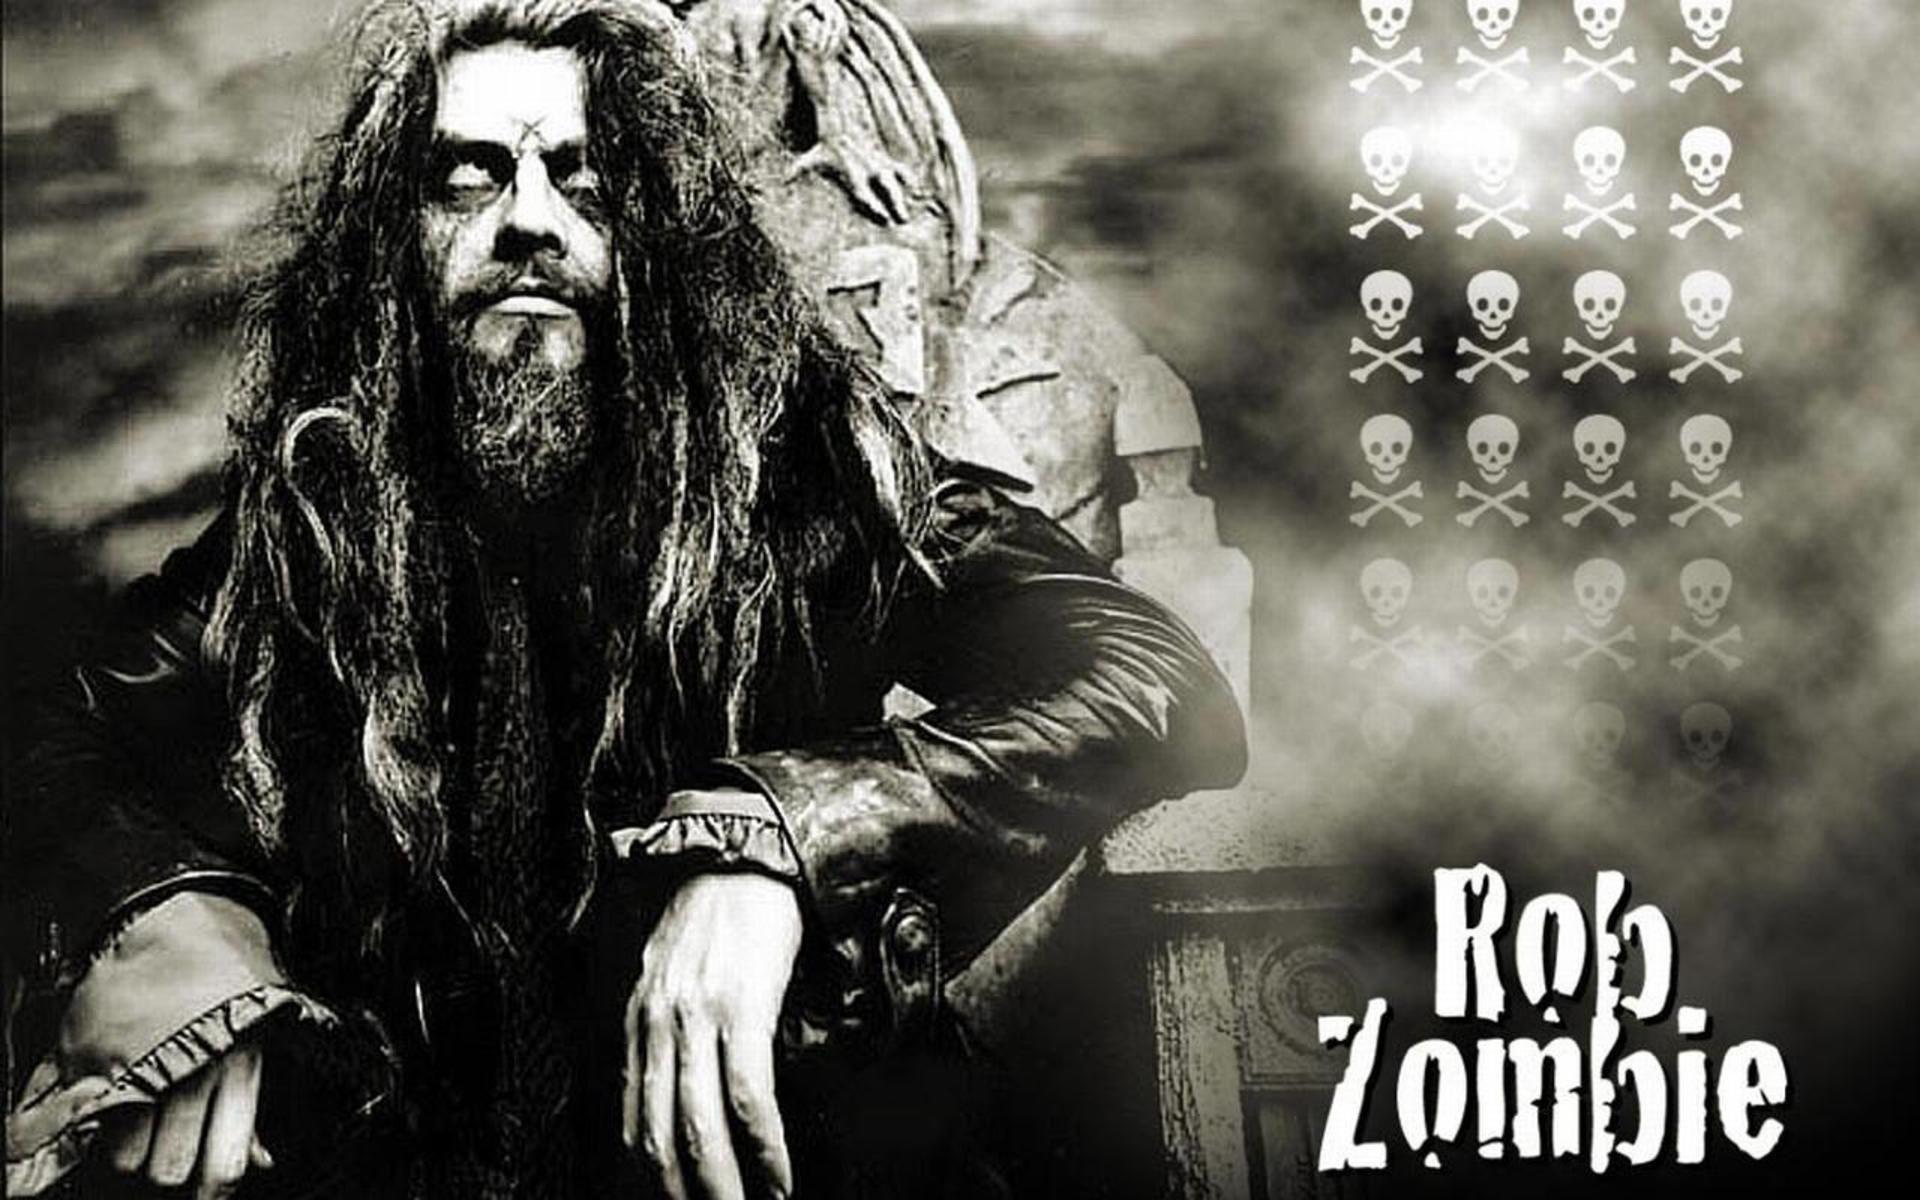 Rob Zombie Image Soloist Wallpaper 1920x1200 px Free Download